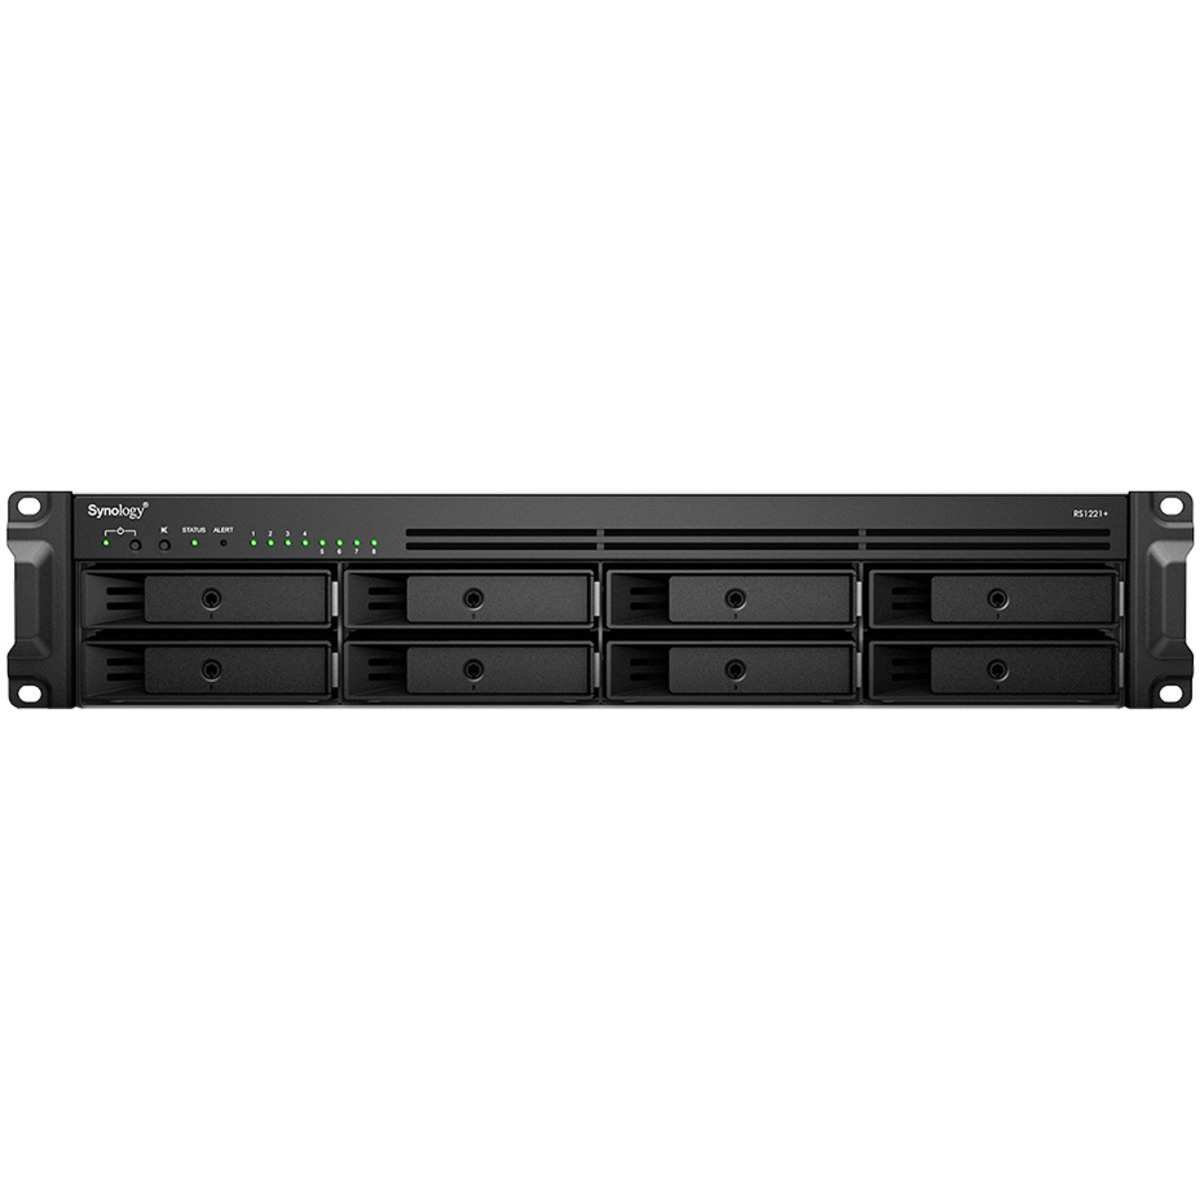 Synology RackStation RS1221+ 64tb 8-Bay RackMount Multimedia / Power User / Business NAS - Network Attached Storage Device 8x8tb TeamGroup EX2 Elite T253E2008T0C101 2.5 550/520MB/s SATA 6Gb/s SSD CONSUMER Class Drives Installed - Burn-In Tested RackStation RS1221+